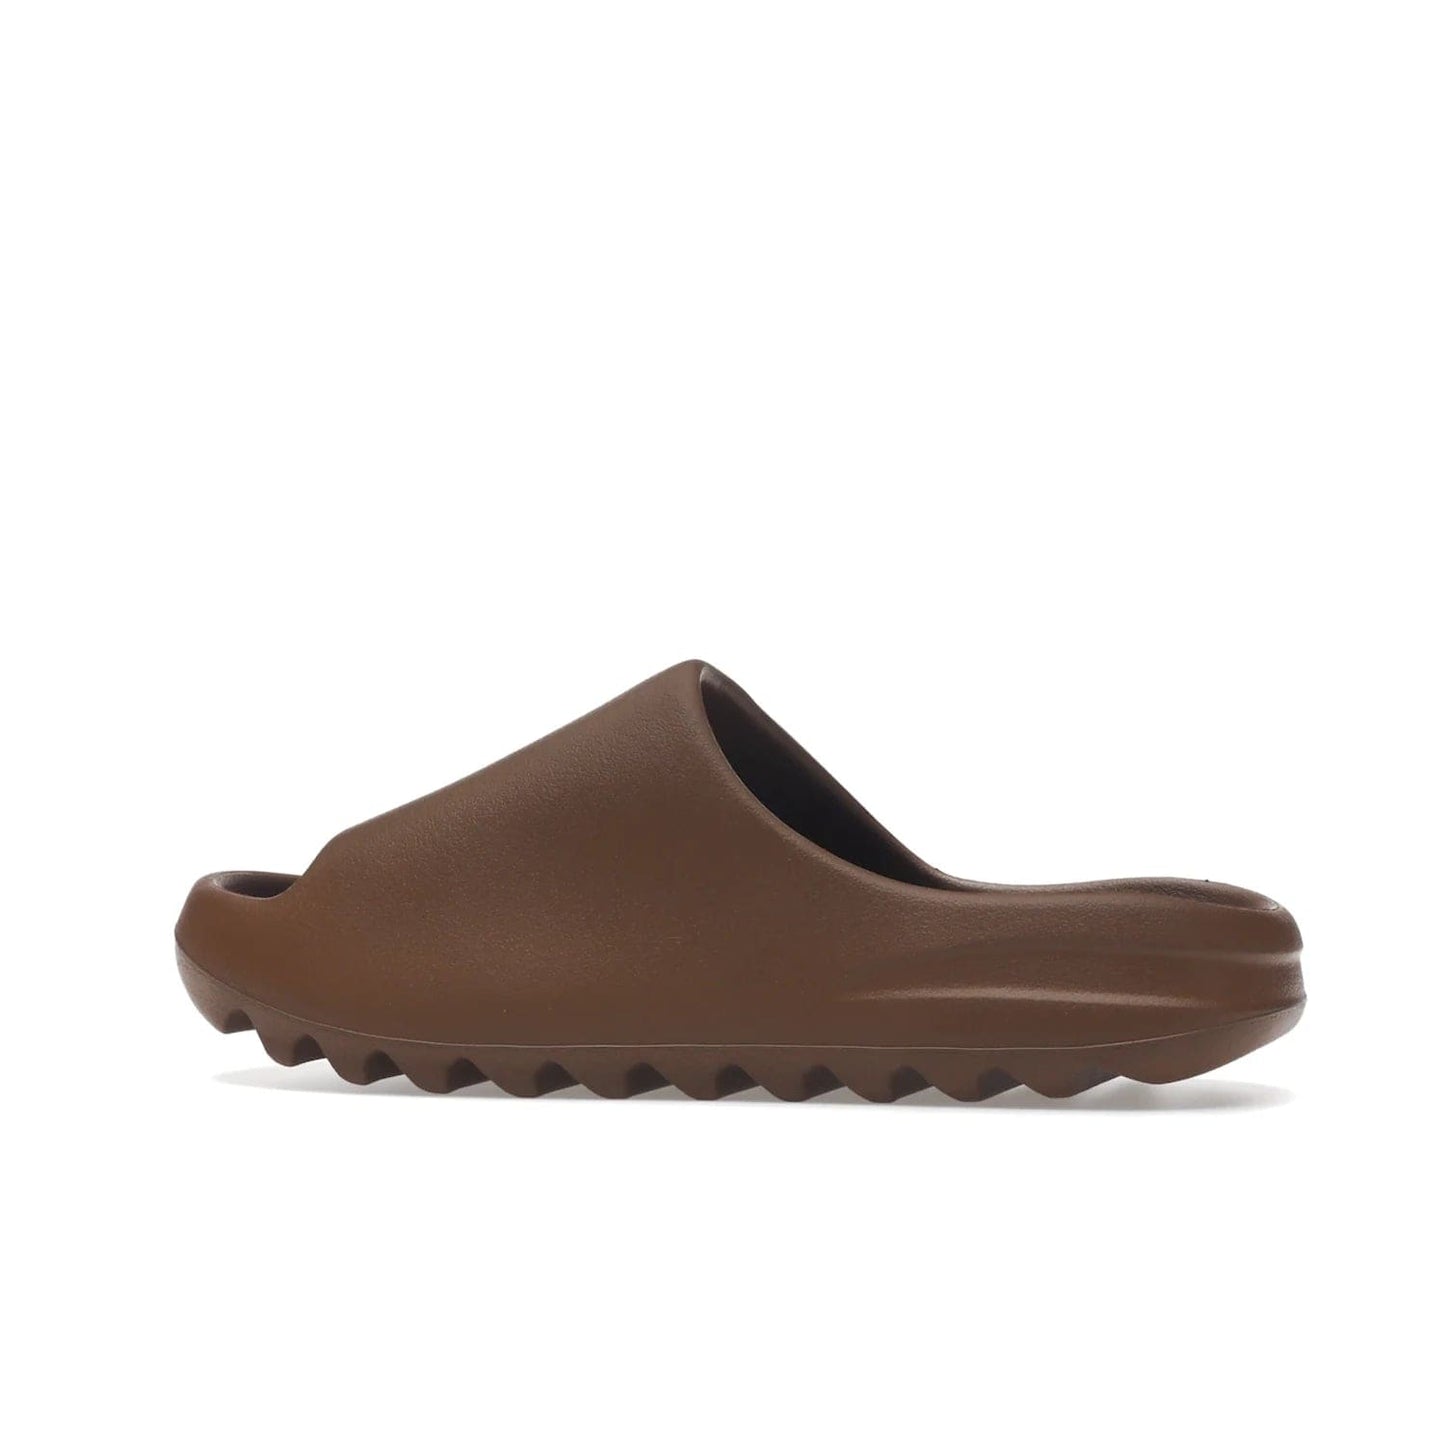 adidas Yeezy Slide Flax - Image 21 - Only at www.BallersClubKickz.com - Score the perfect casual look with the adidas Yeezy Slide Flax. Made with lightweight injected EVA plus horizontal grooves underfoot for traction. Release on August 22, 2022. $70.